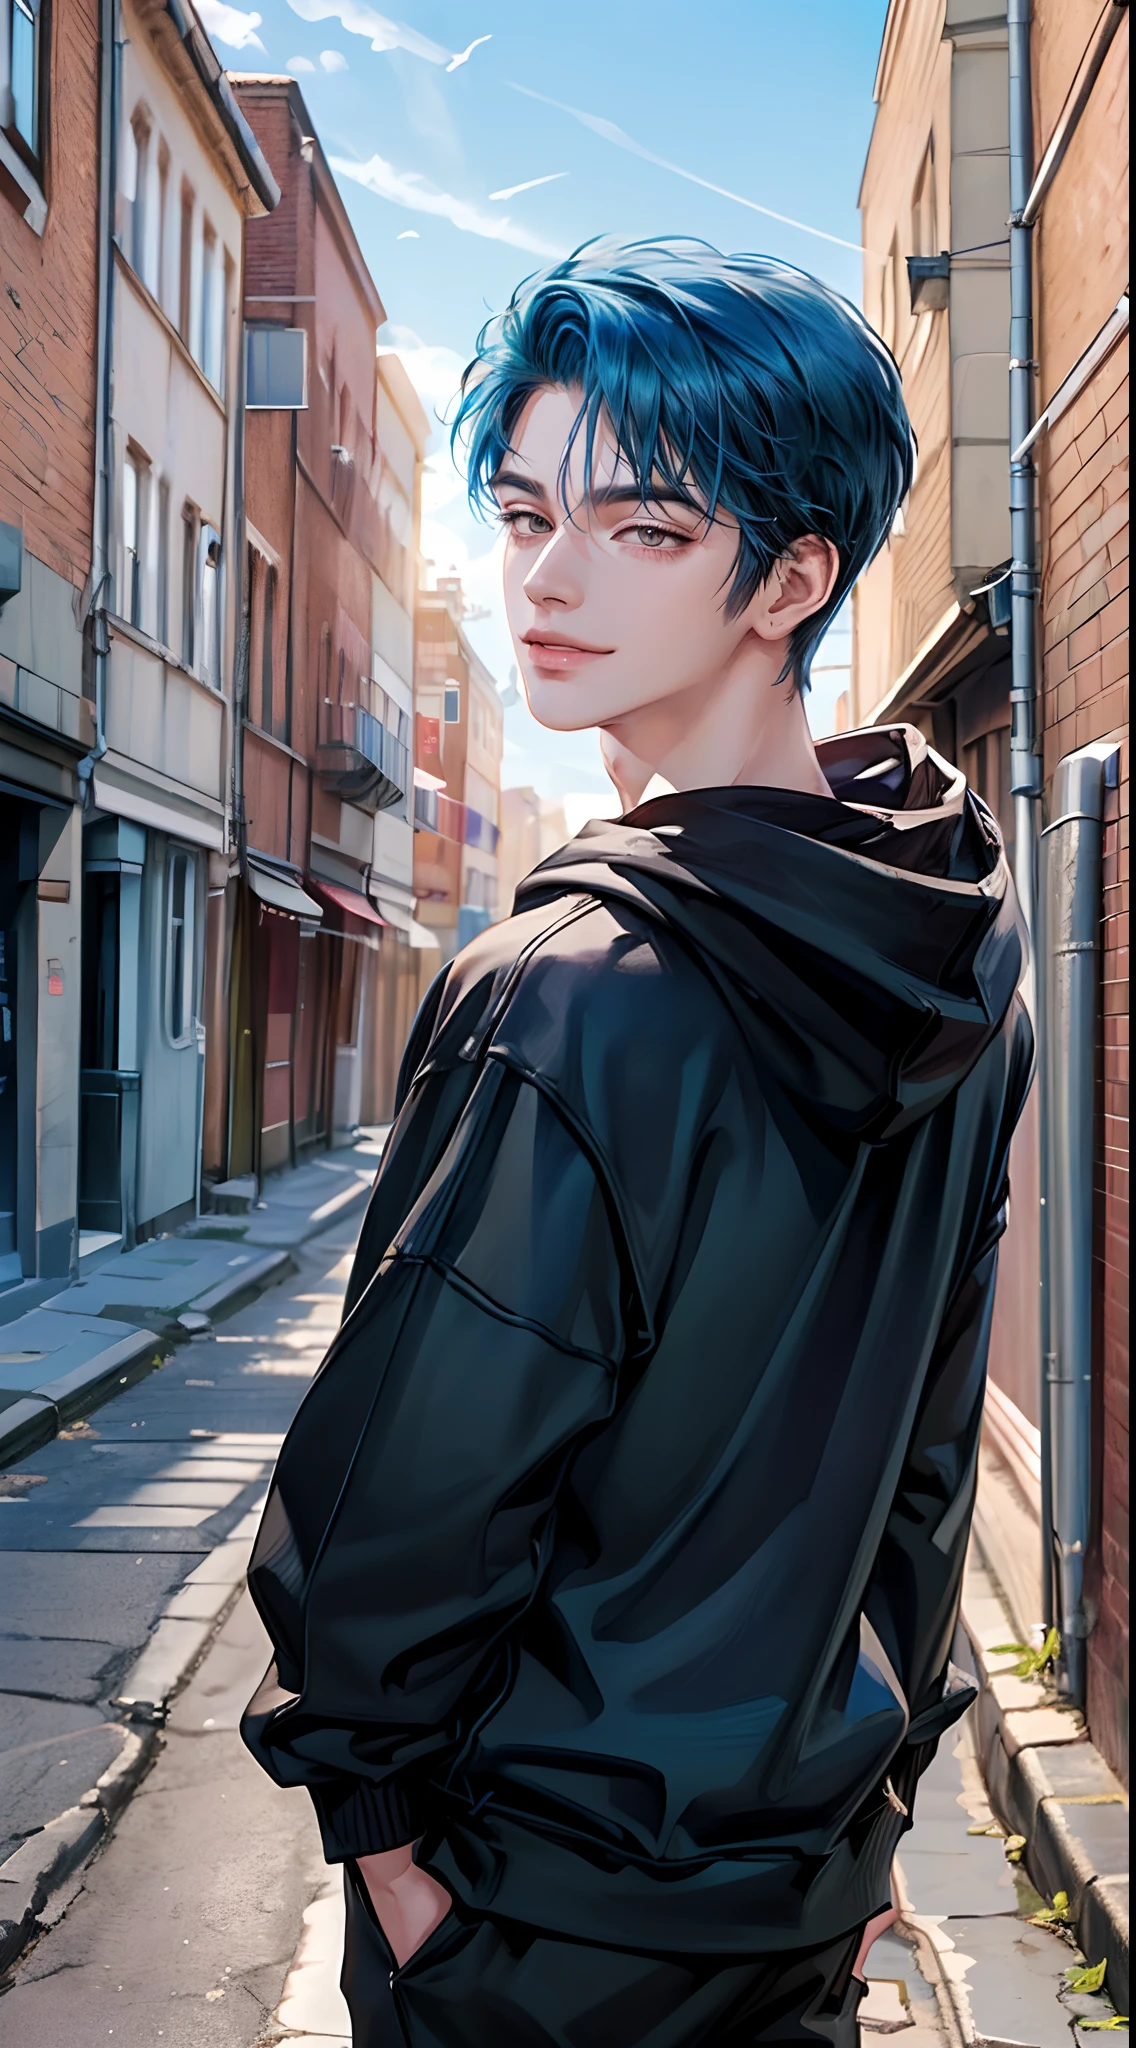 ((4K works))、​masterpiece、(top-quality)、One Beautiful Boy、Slim body、tall、((Attractive street style in black hoodie))、(Detailed beautiful eyes)、You can see a beautiful collarbone、Fantastic Britain、Back alley in the daytime、((Fantastic back alley))、((Daytime bright sky))、((Fantastic back alley))、((Shot in a fantastic back alley))、((Short-haired bright blue hair))、((Smaller face))、((White eyes))、((American adult male))、((Adult male 26 years old))、((Cool Men))、((Like a celebrity))、((Smile showing teeth and smiling))、((Korean Makeup))、((elongated and sharp eyes))、((boyish))、((Upper body photography))、((Happy dating))、Professional Photos、((Shot alone))、((Shot from diagonally in front))、((Shot in close proximity to him))、lovey-dovey、((He is trying to kiss the viewer))、Stretch your hands forward、((He is walking in front of the viewer))